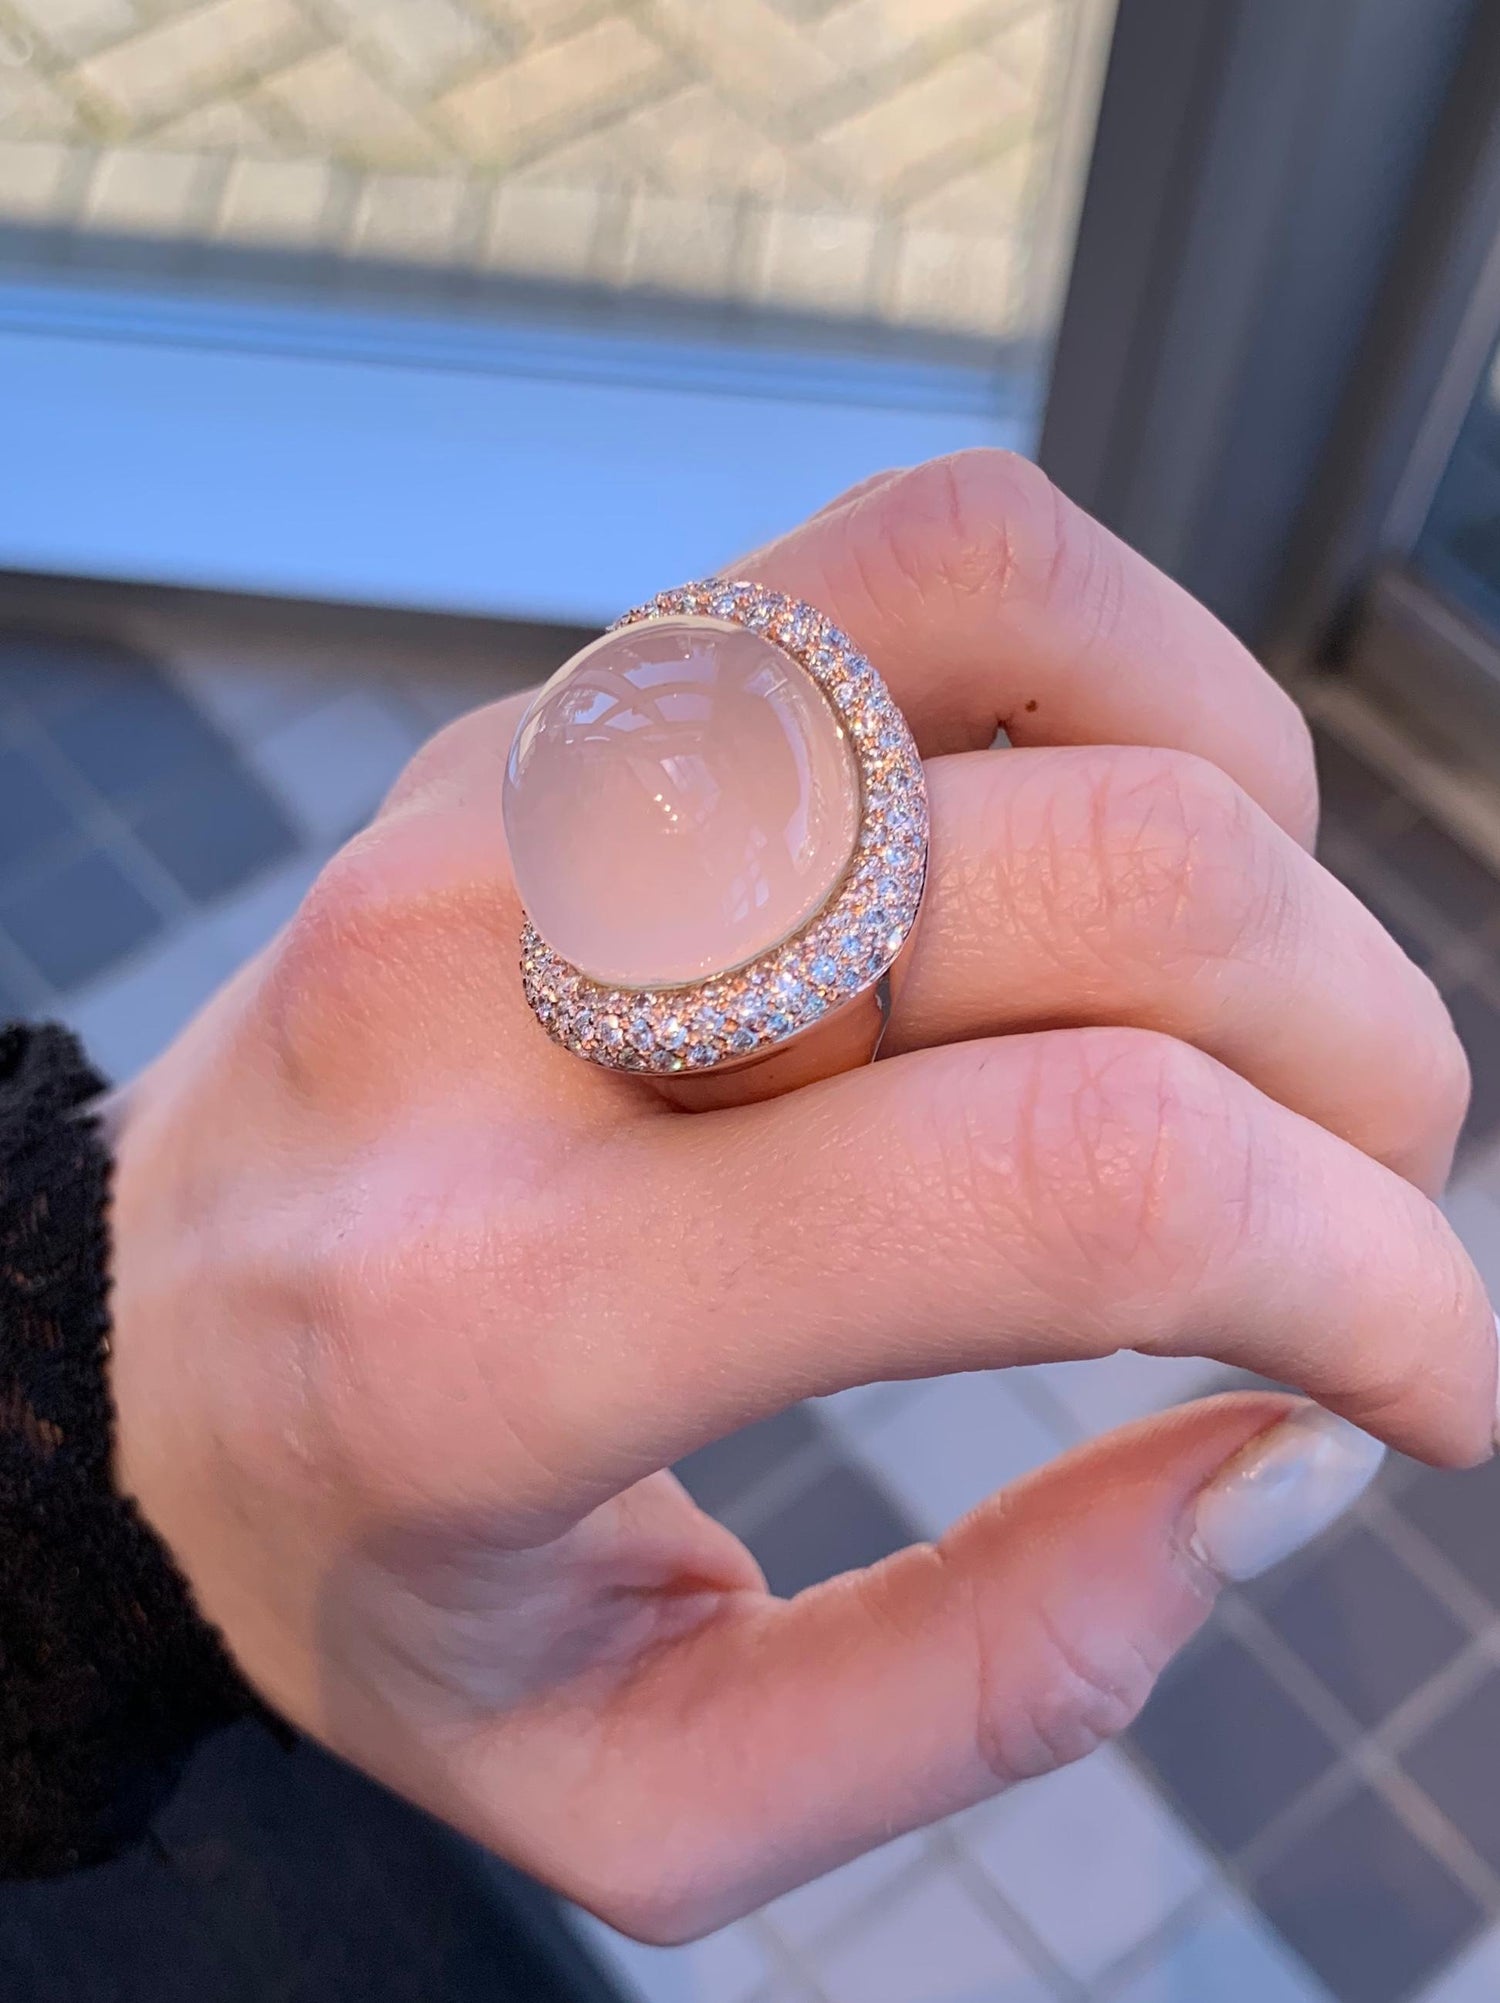 18k Or Rose EP Taille Brillant Crystal Fashion Cocktail Ring